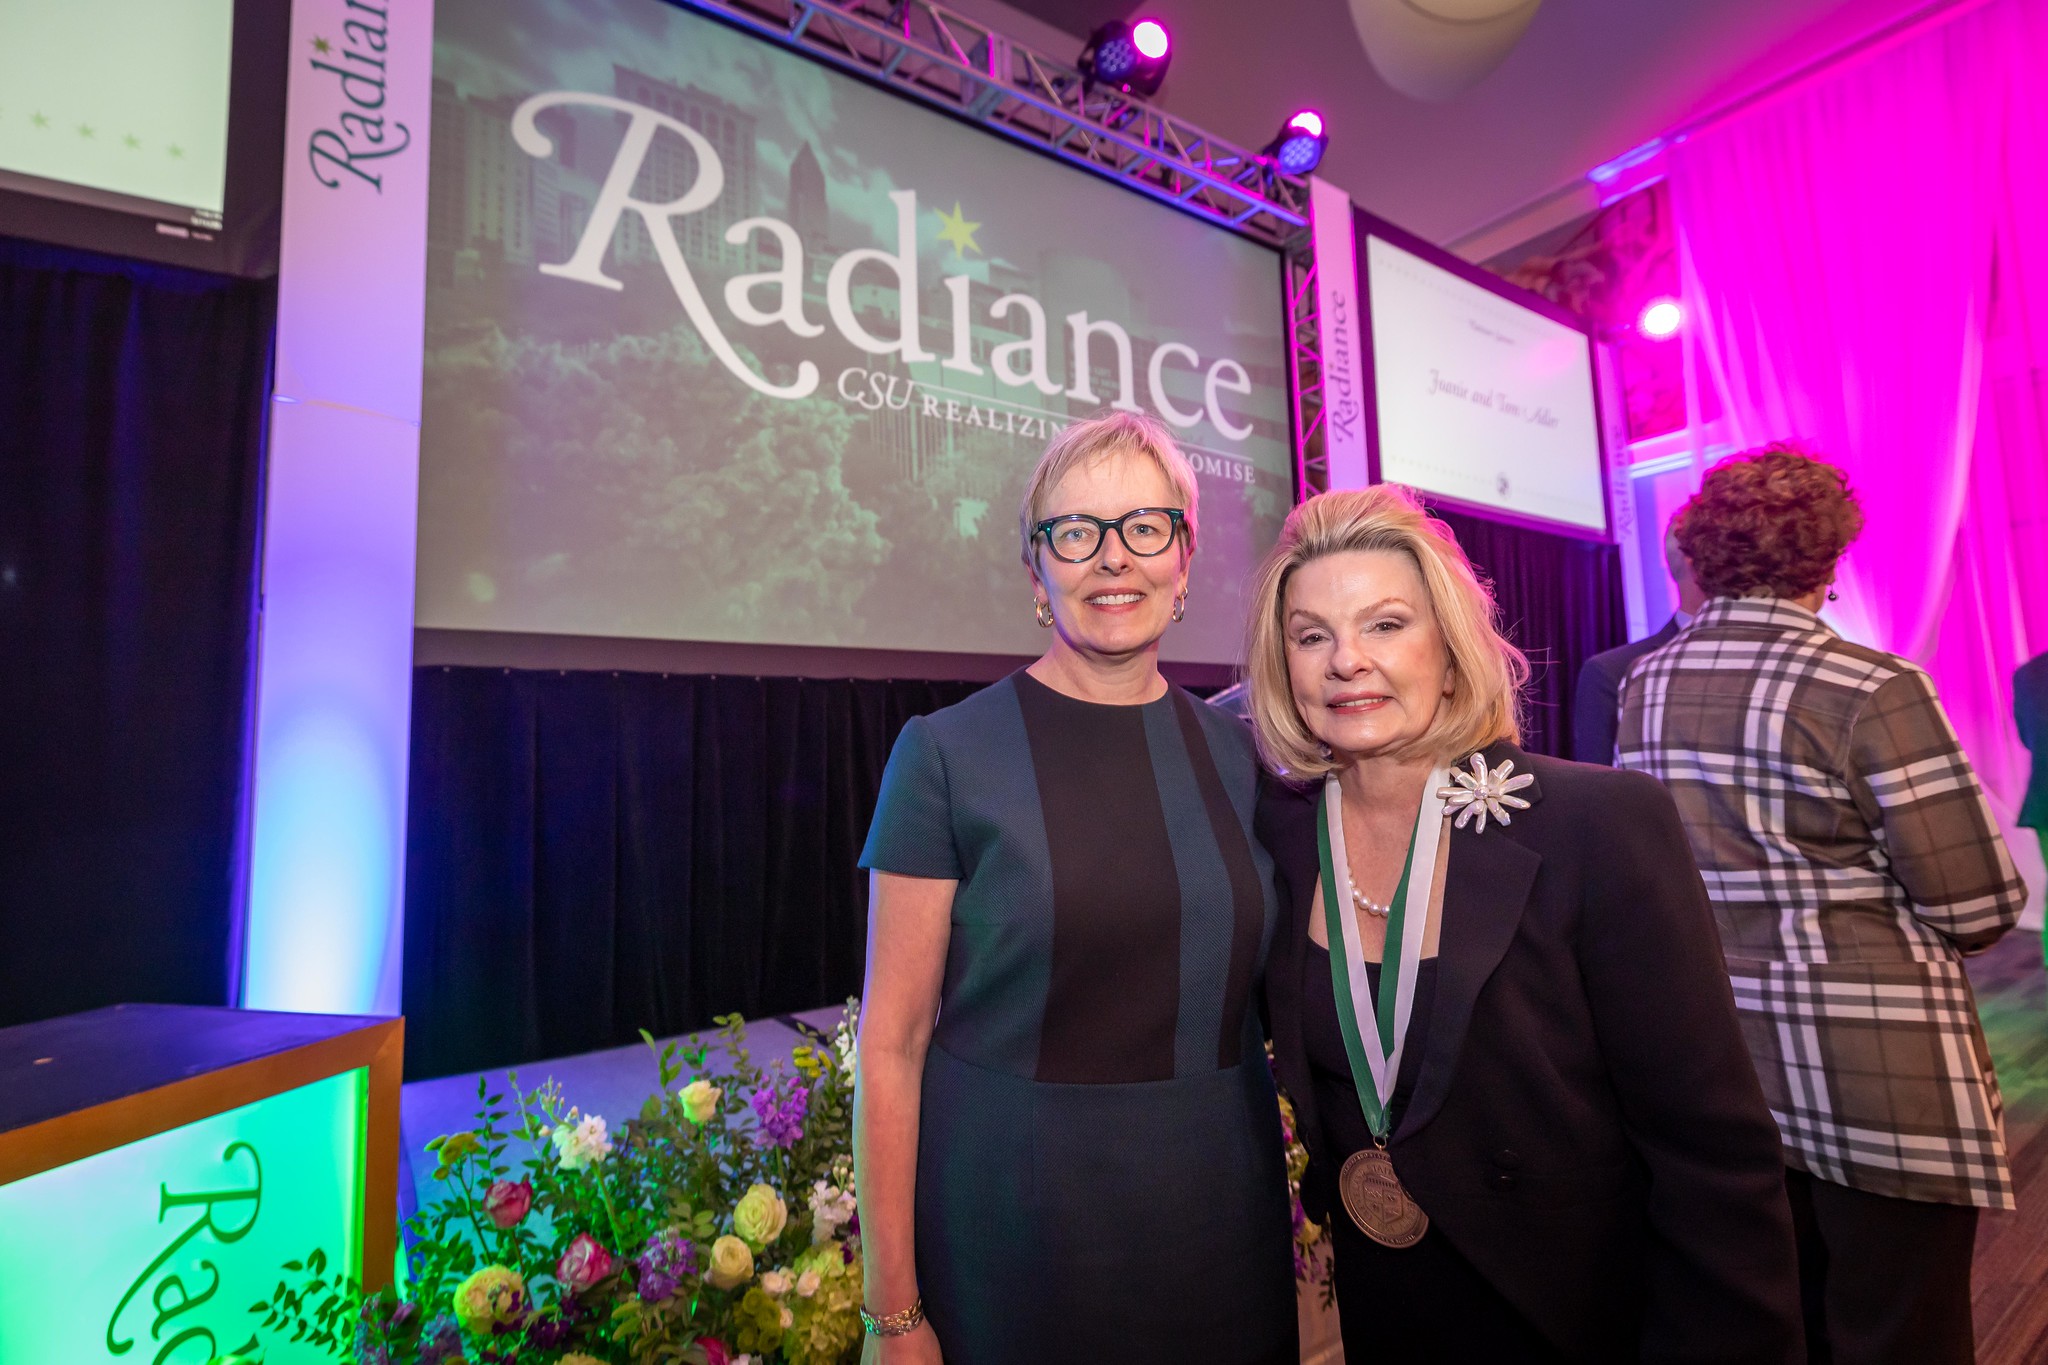 On May 11, after three years, Radiance, Cleveland State Universitys premier fundraising event, returned to the campus ballroom to celebrate over $3 million raised in support for student scholarships, programs, services and more. During the event, attende